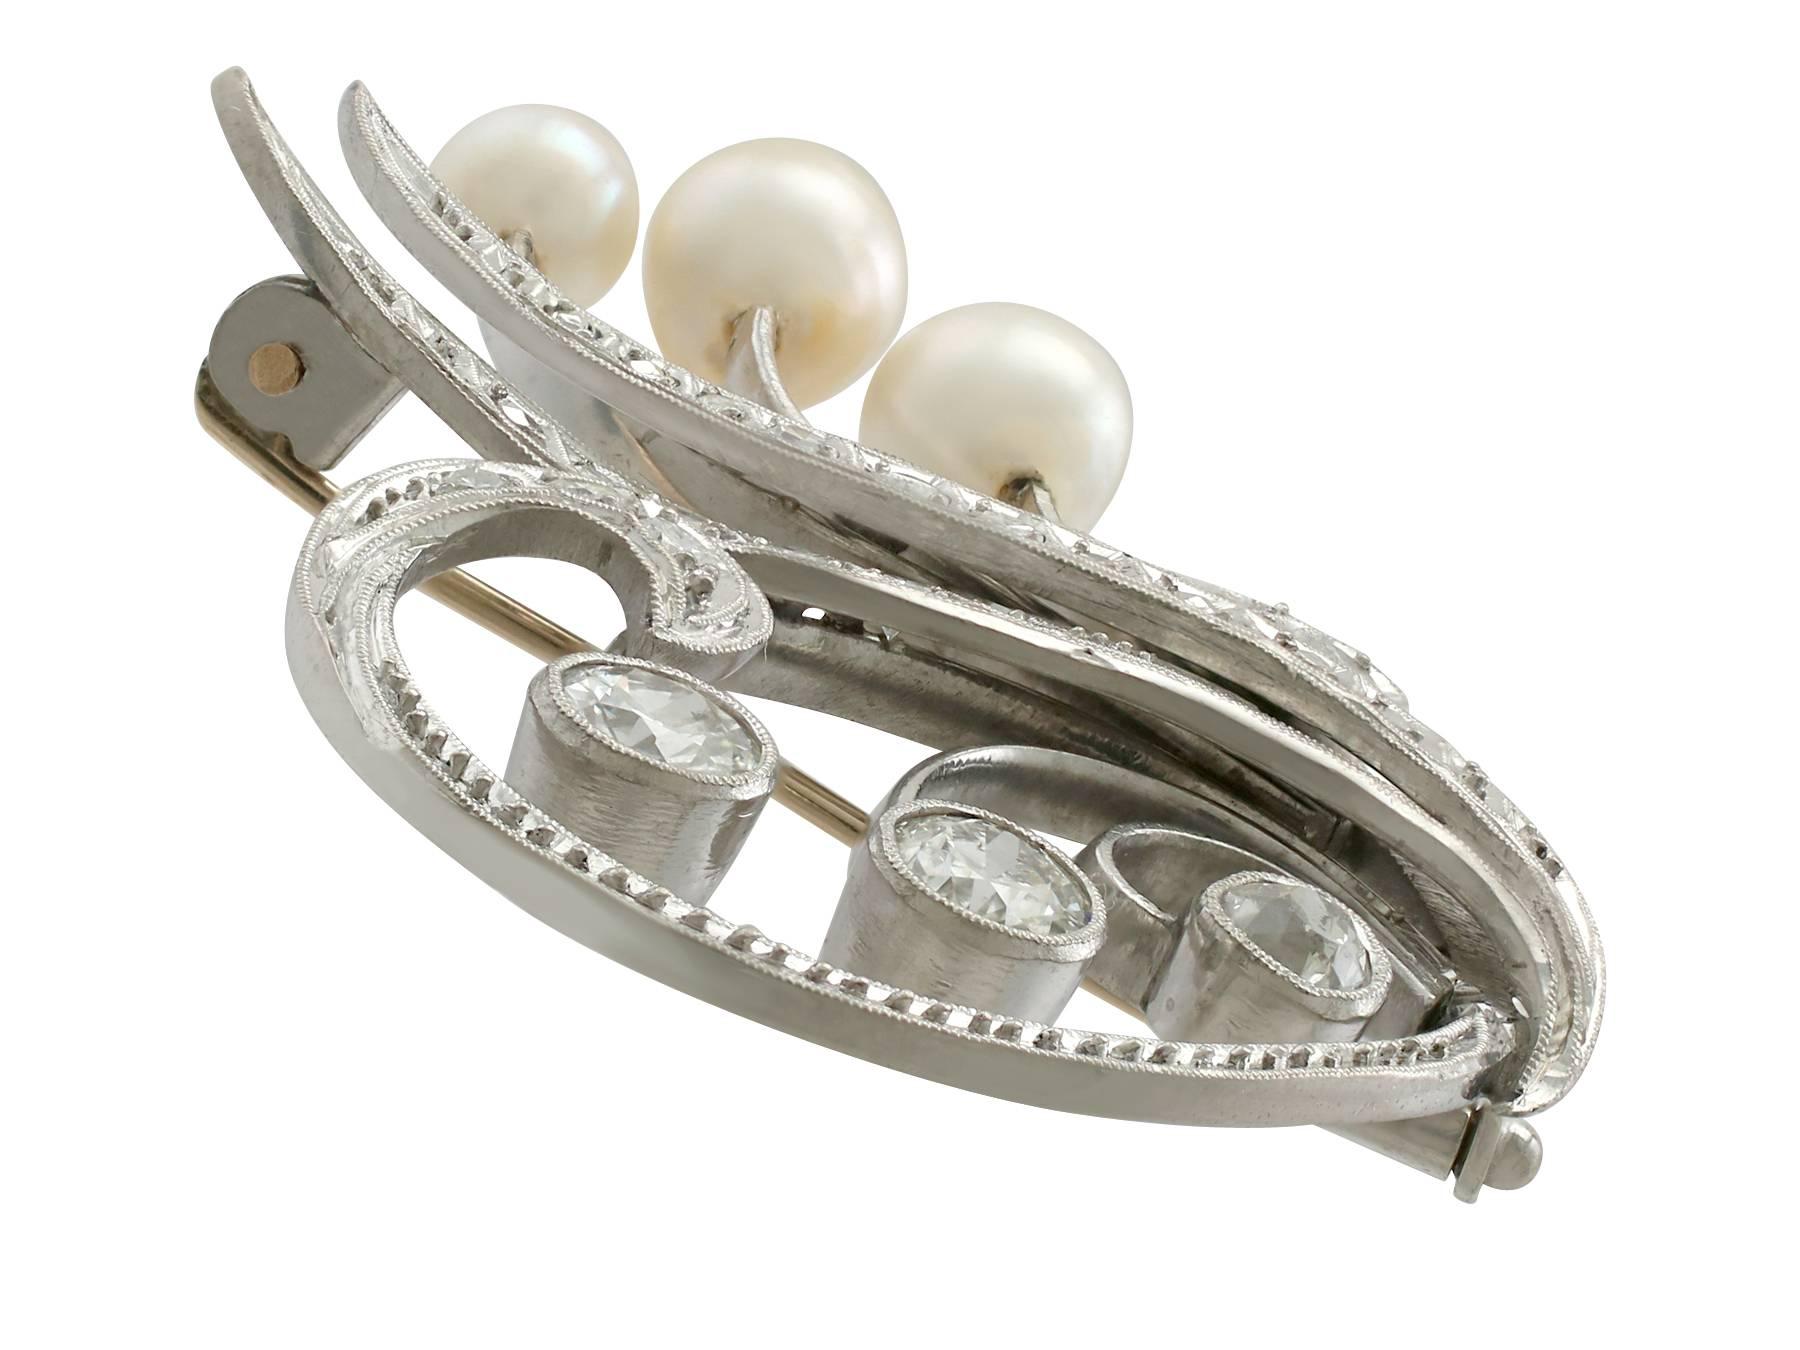 A stunning 1.53 carat diamond, cultured pearl and platinum brooch; part of our diverse jewelry and estate jewelry collections

This stunning, fine and impressive pearl and diamond brooch has been crafted in platinum.

The pierced decorated,